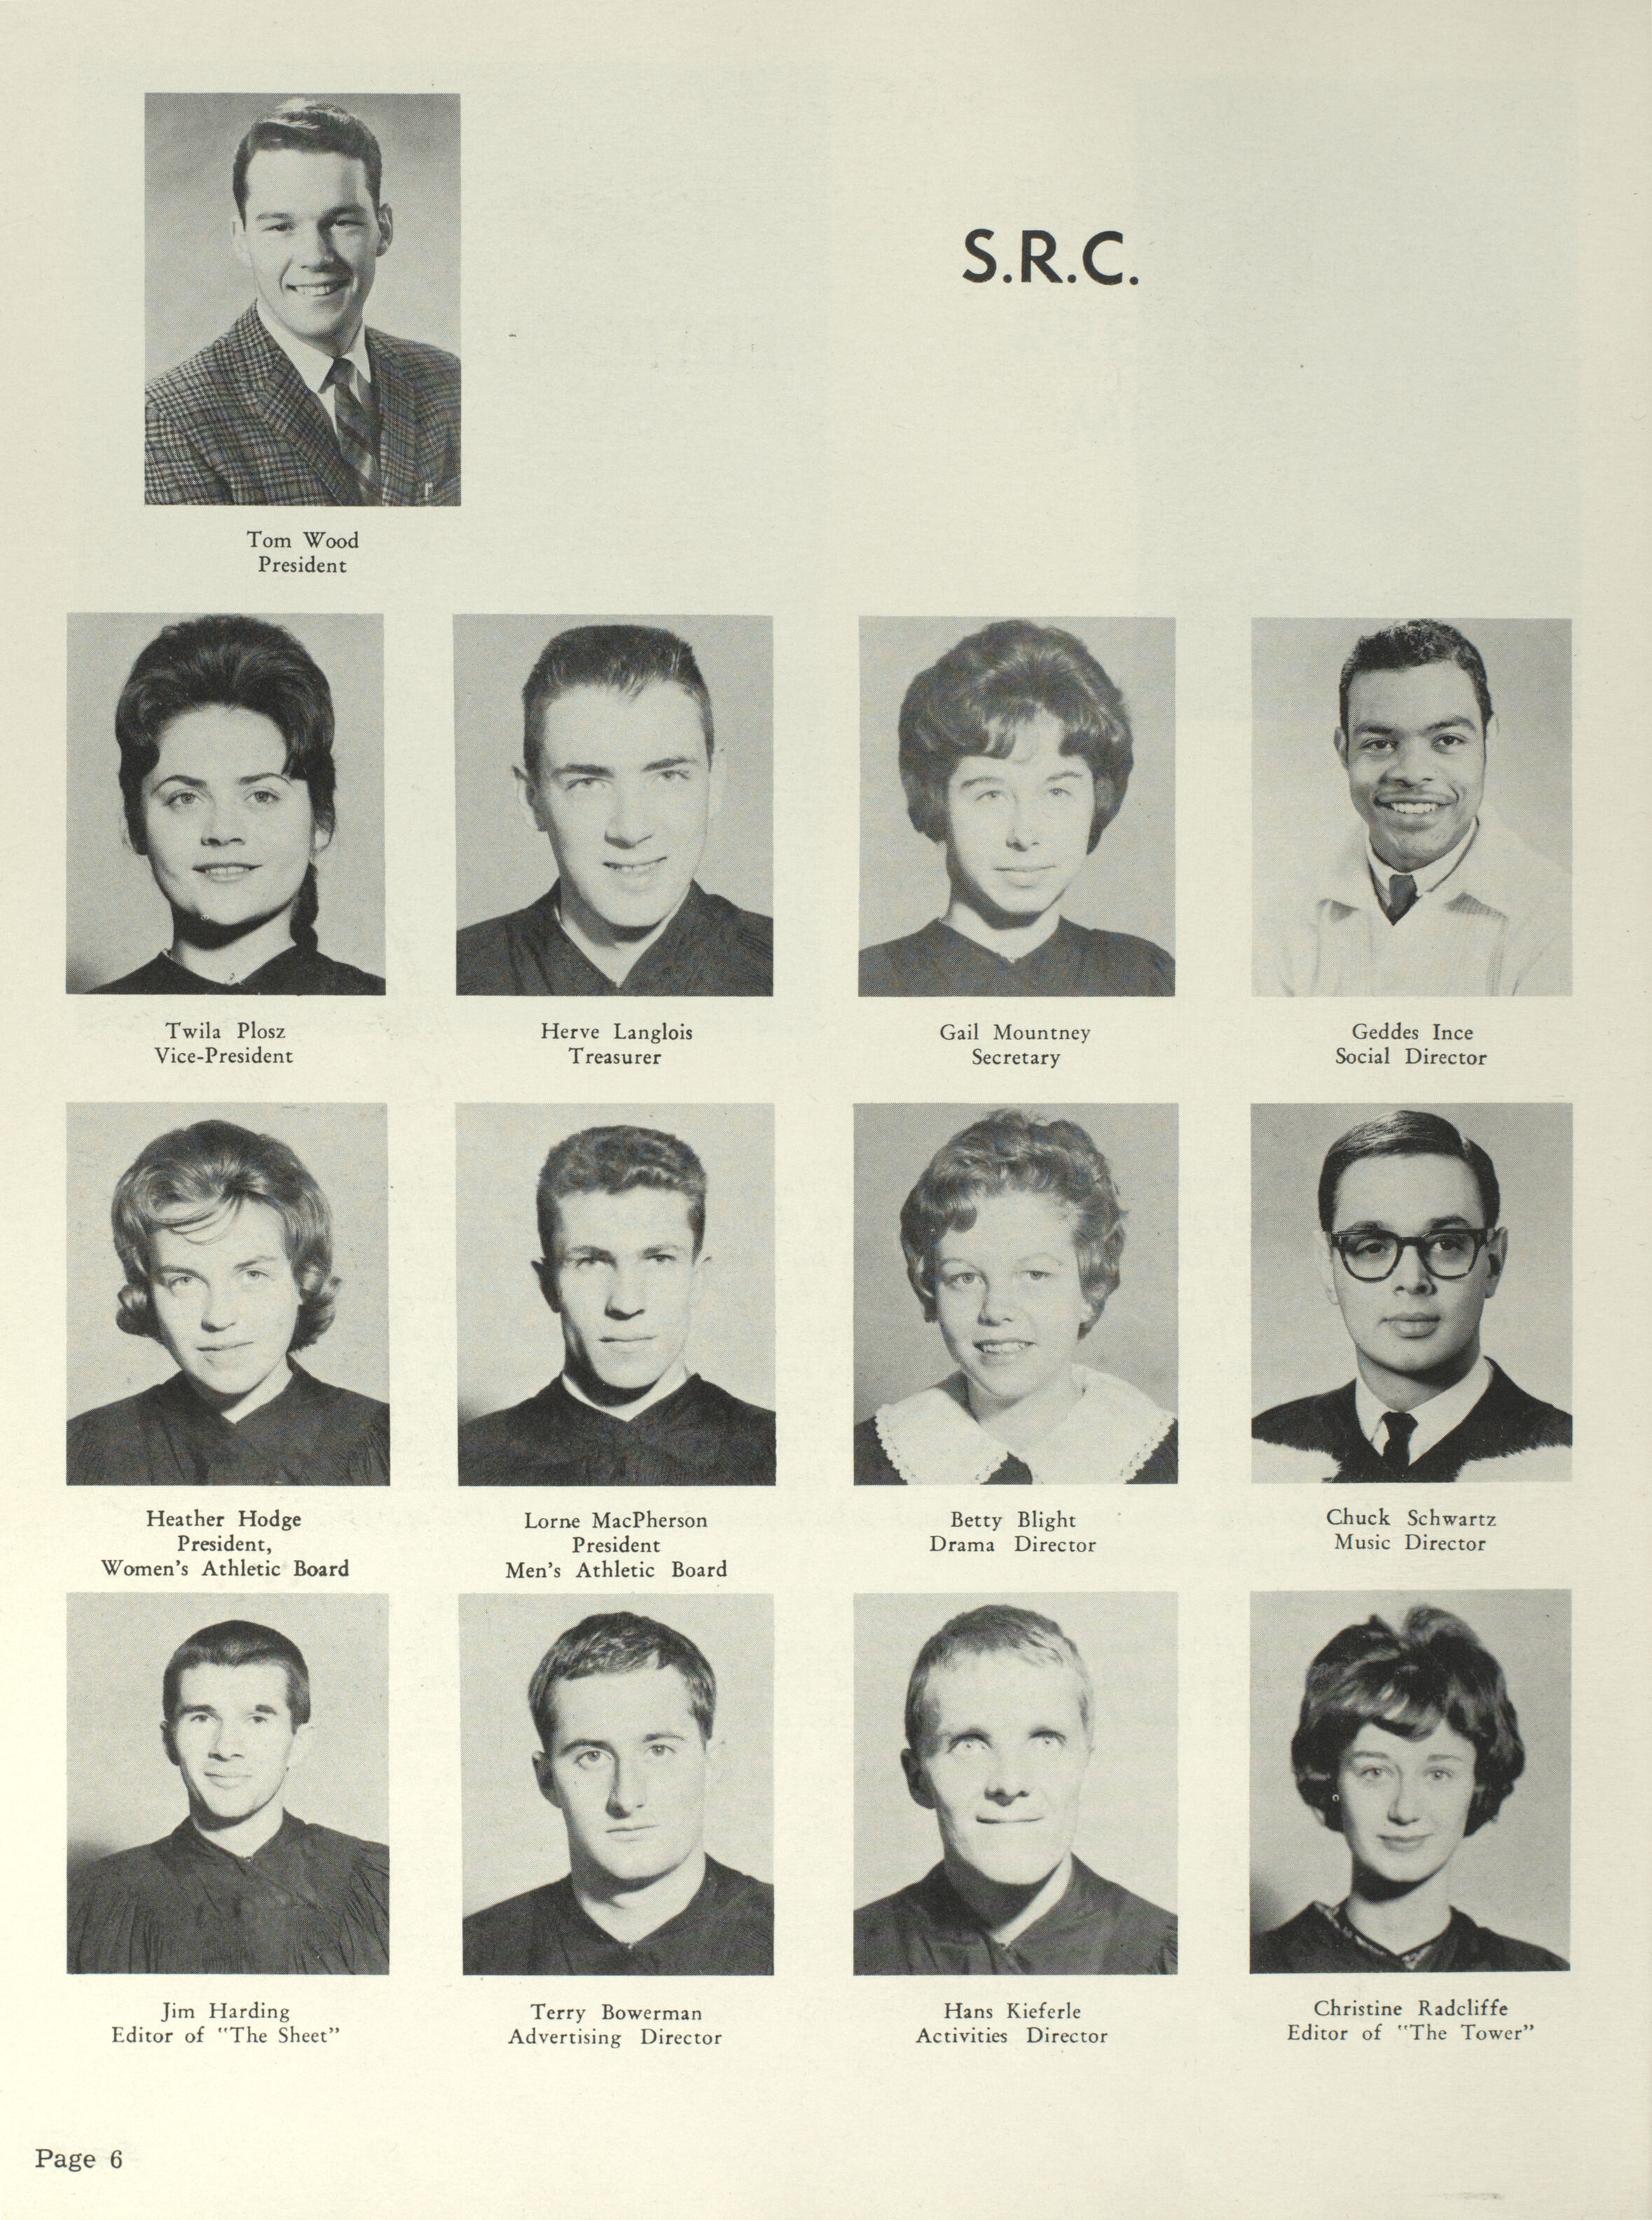 Page 6 of The Tower yearbook: 1962, available on Canadiana.ca.